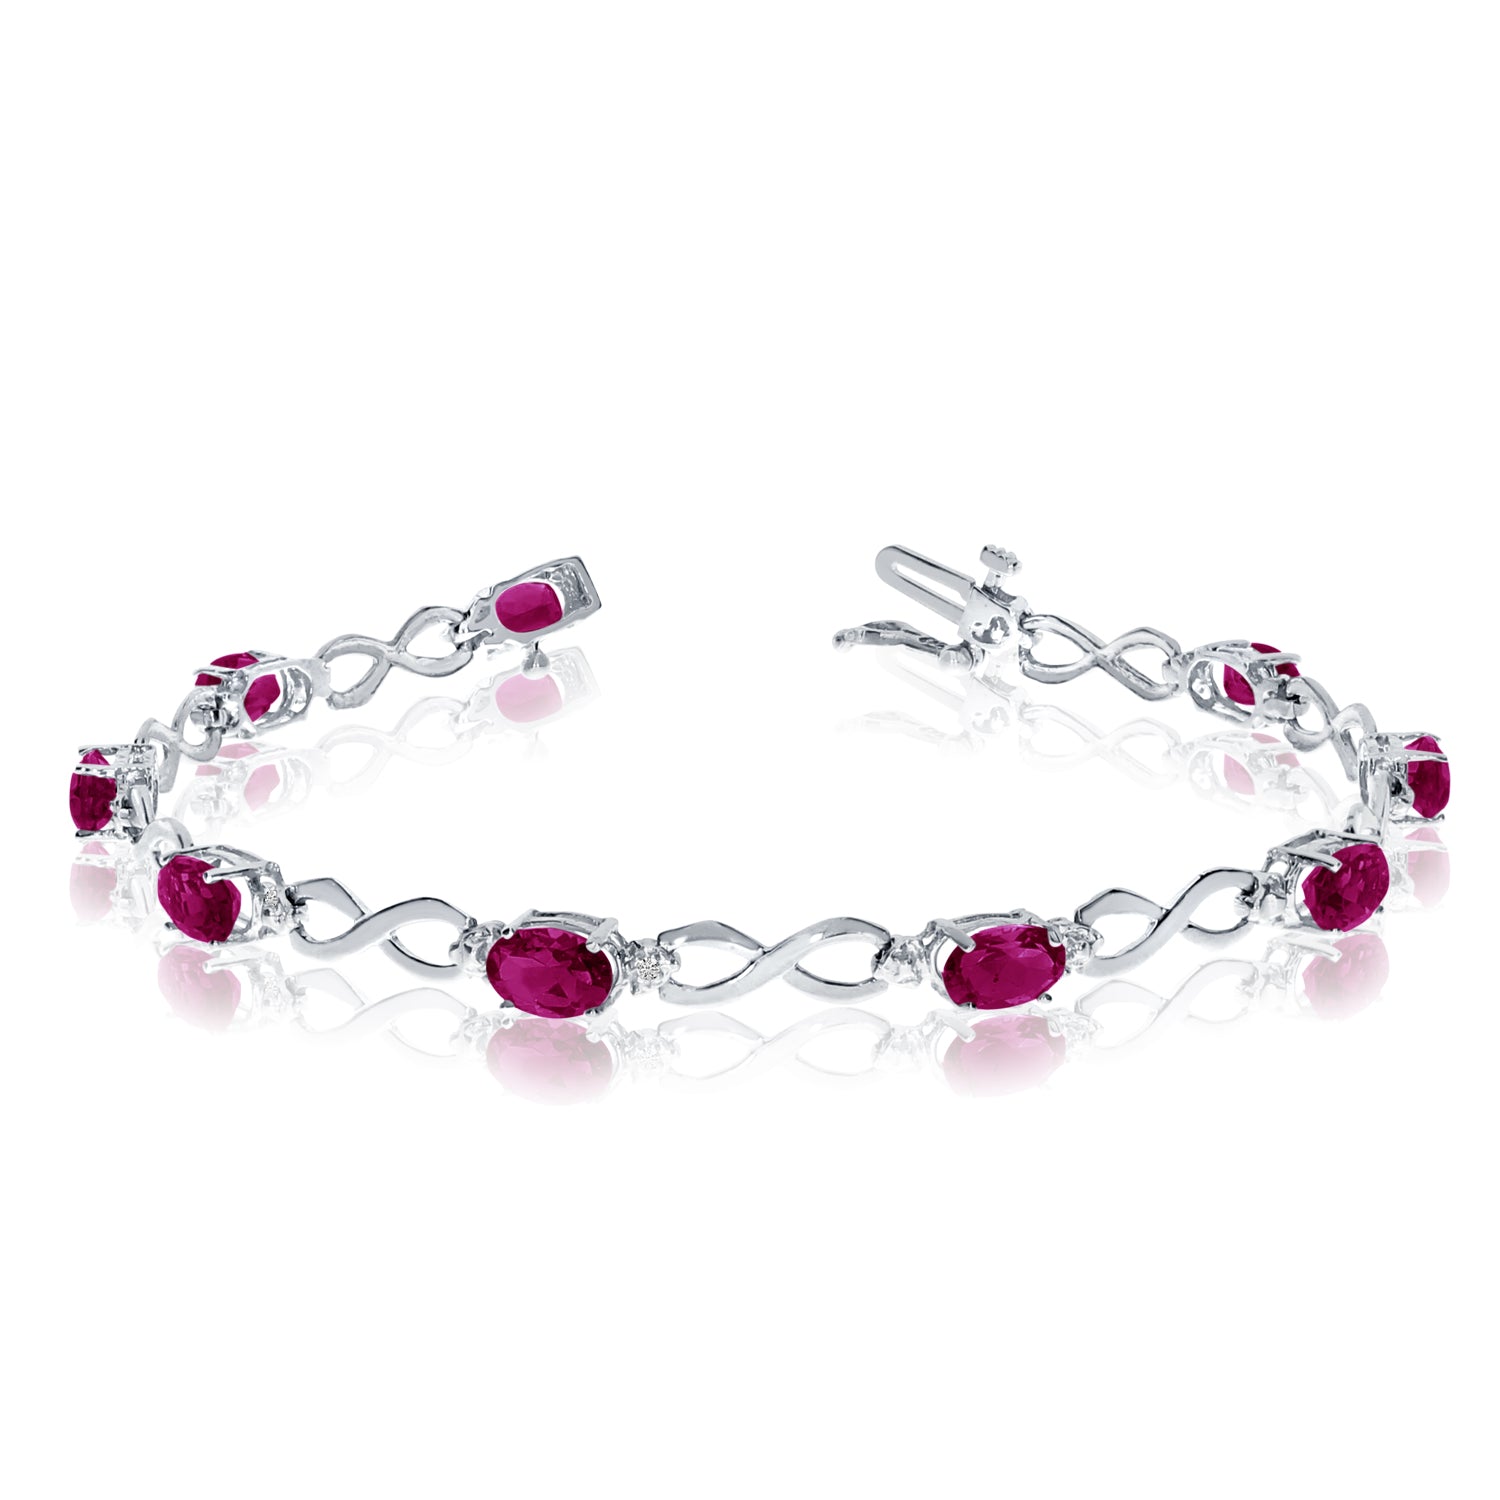 10K White Gold Oval Ruby Stones And Diamonds Infinity Tennis Bracelet, 7" fine designer jewelry for men and women